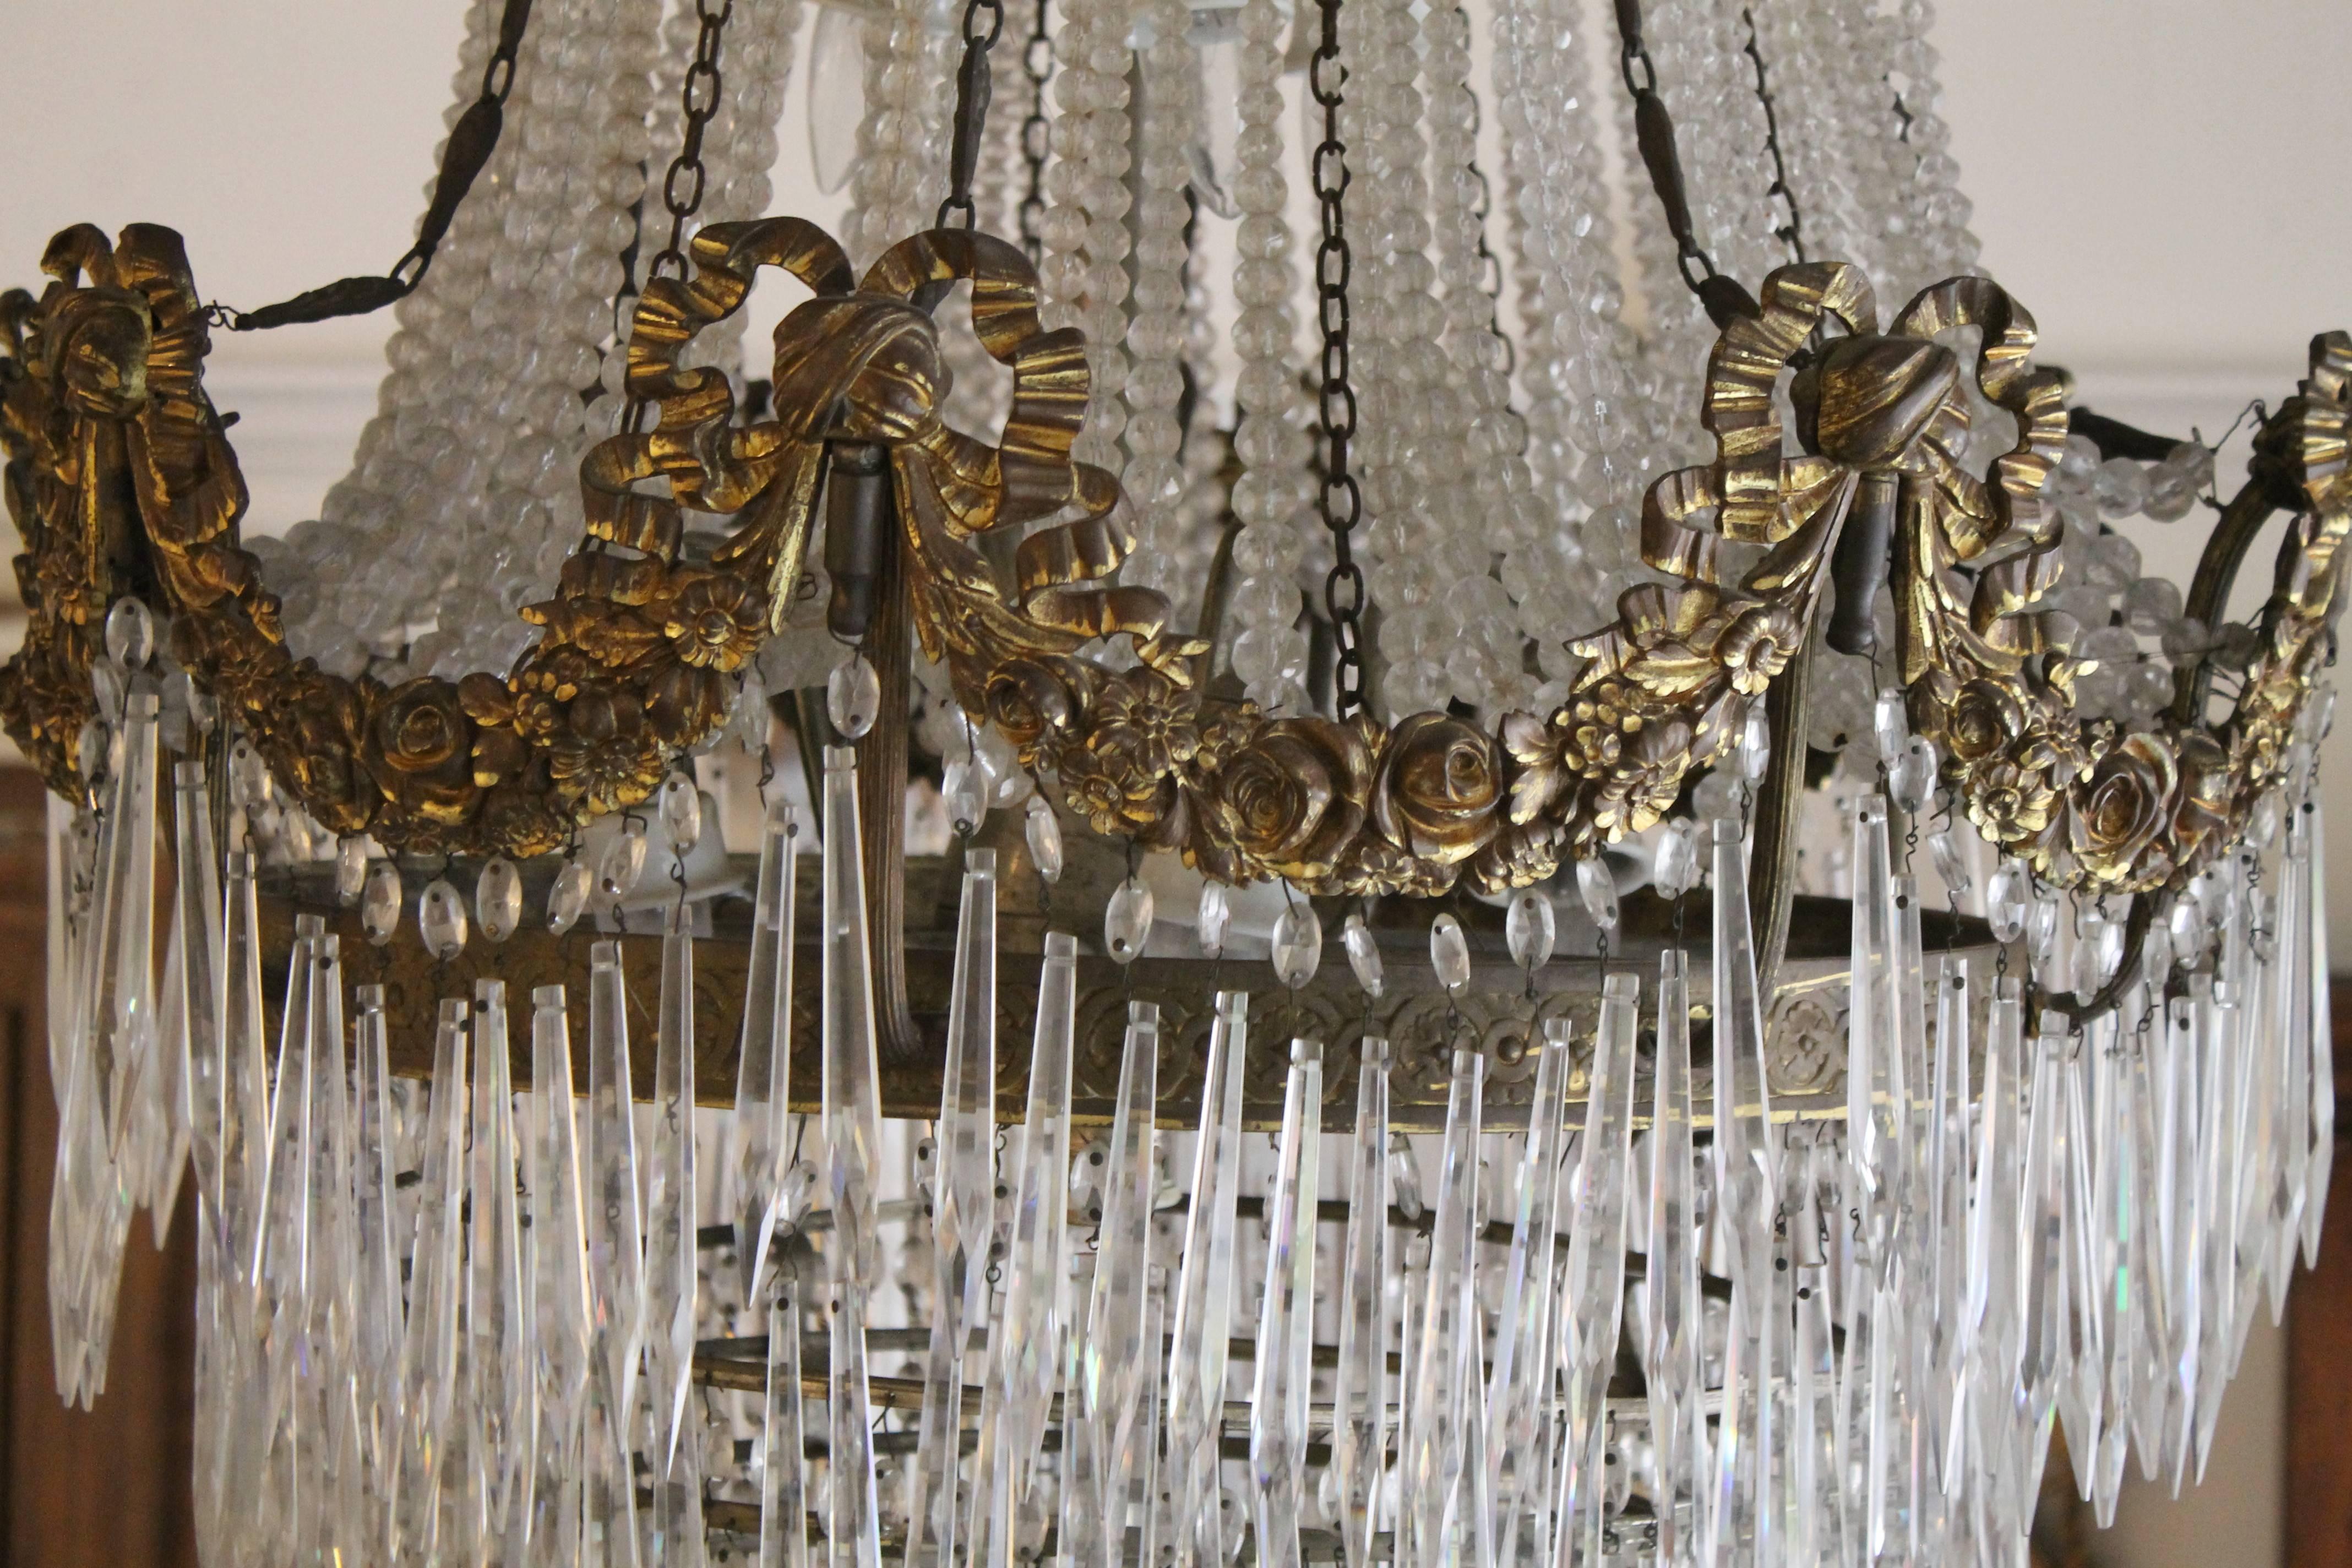 Large Empire eight-light ballroom style chandelier with nine layers of prism crystals at the bottom and finished with beautiful crystal prisms draped and accented with gilt bronze ribbons and rose swags. Finished in antique gilt over bronze